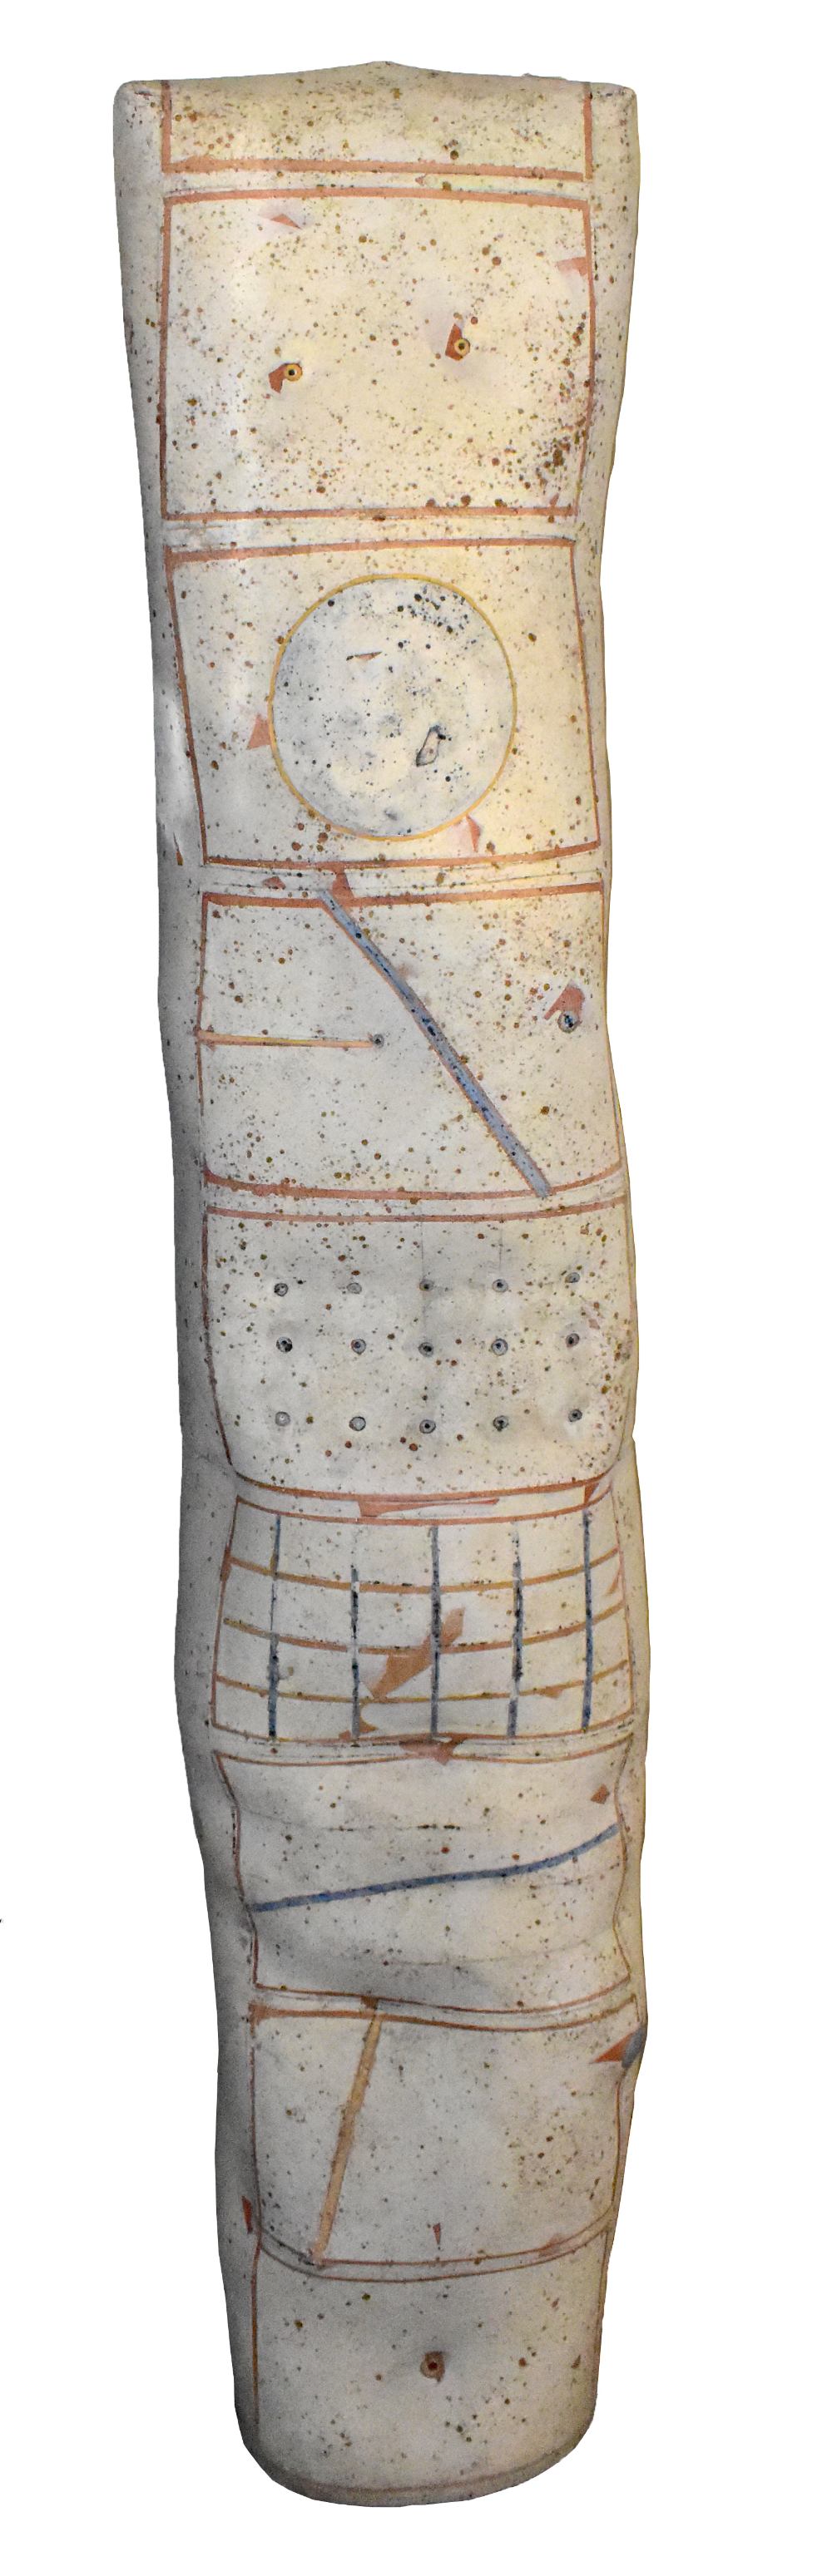 REGINA HEINZ (born 1957); a tall earthenware two-part cushion-like sculptural form decorated with